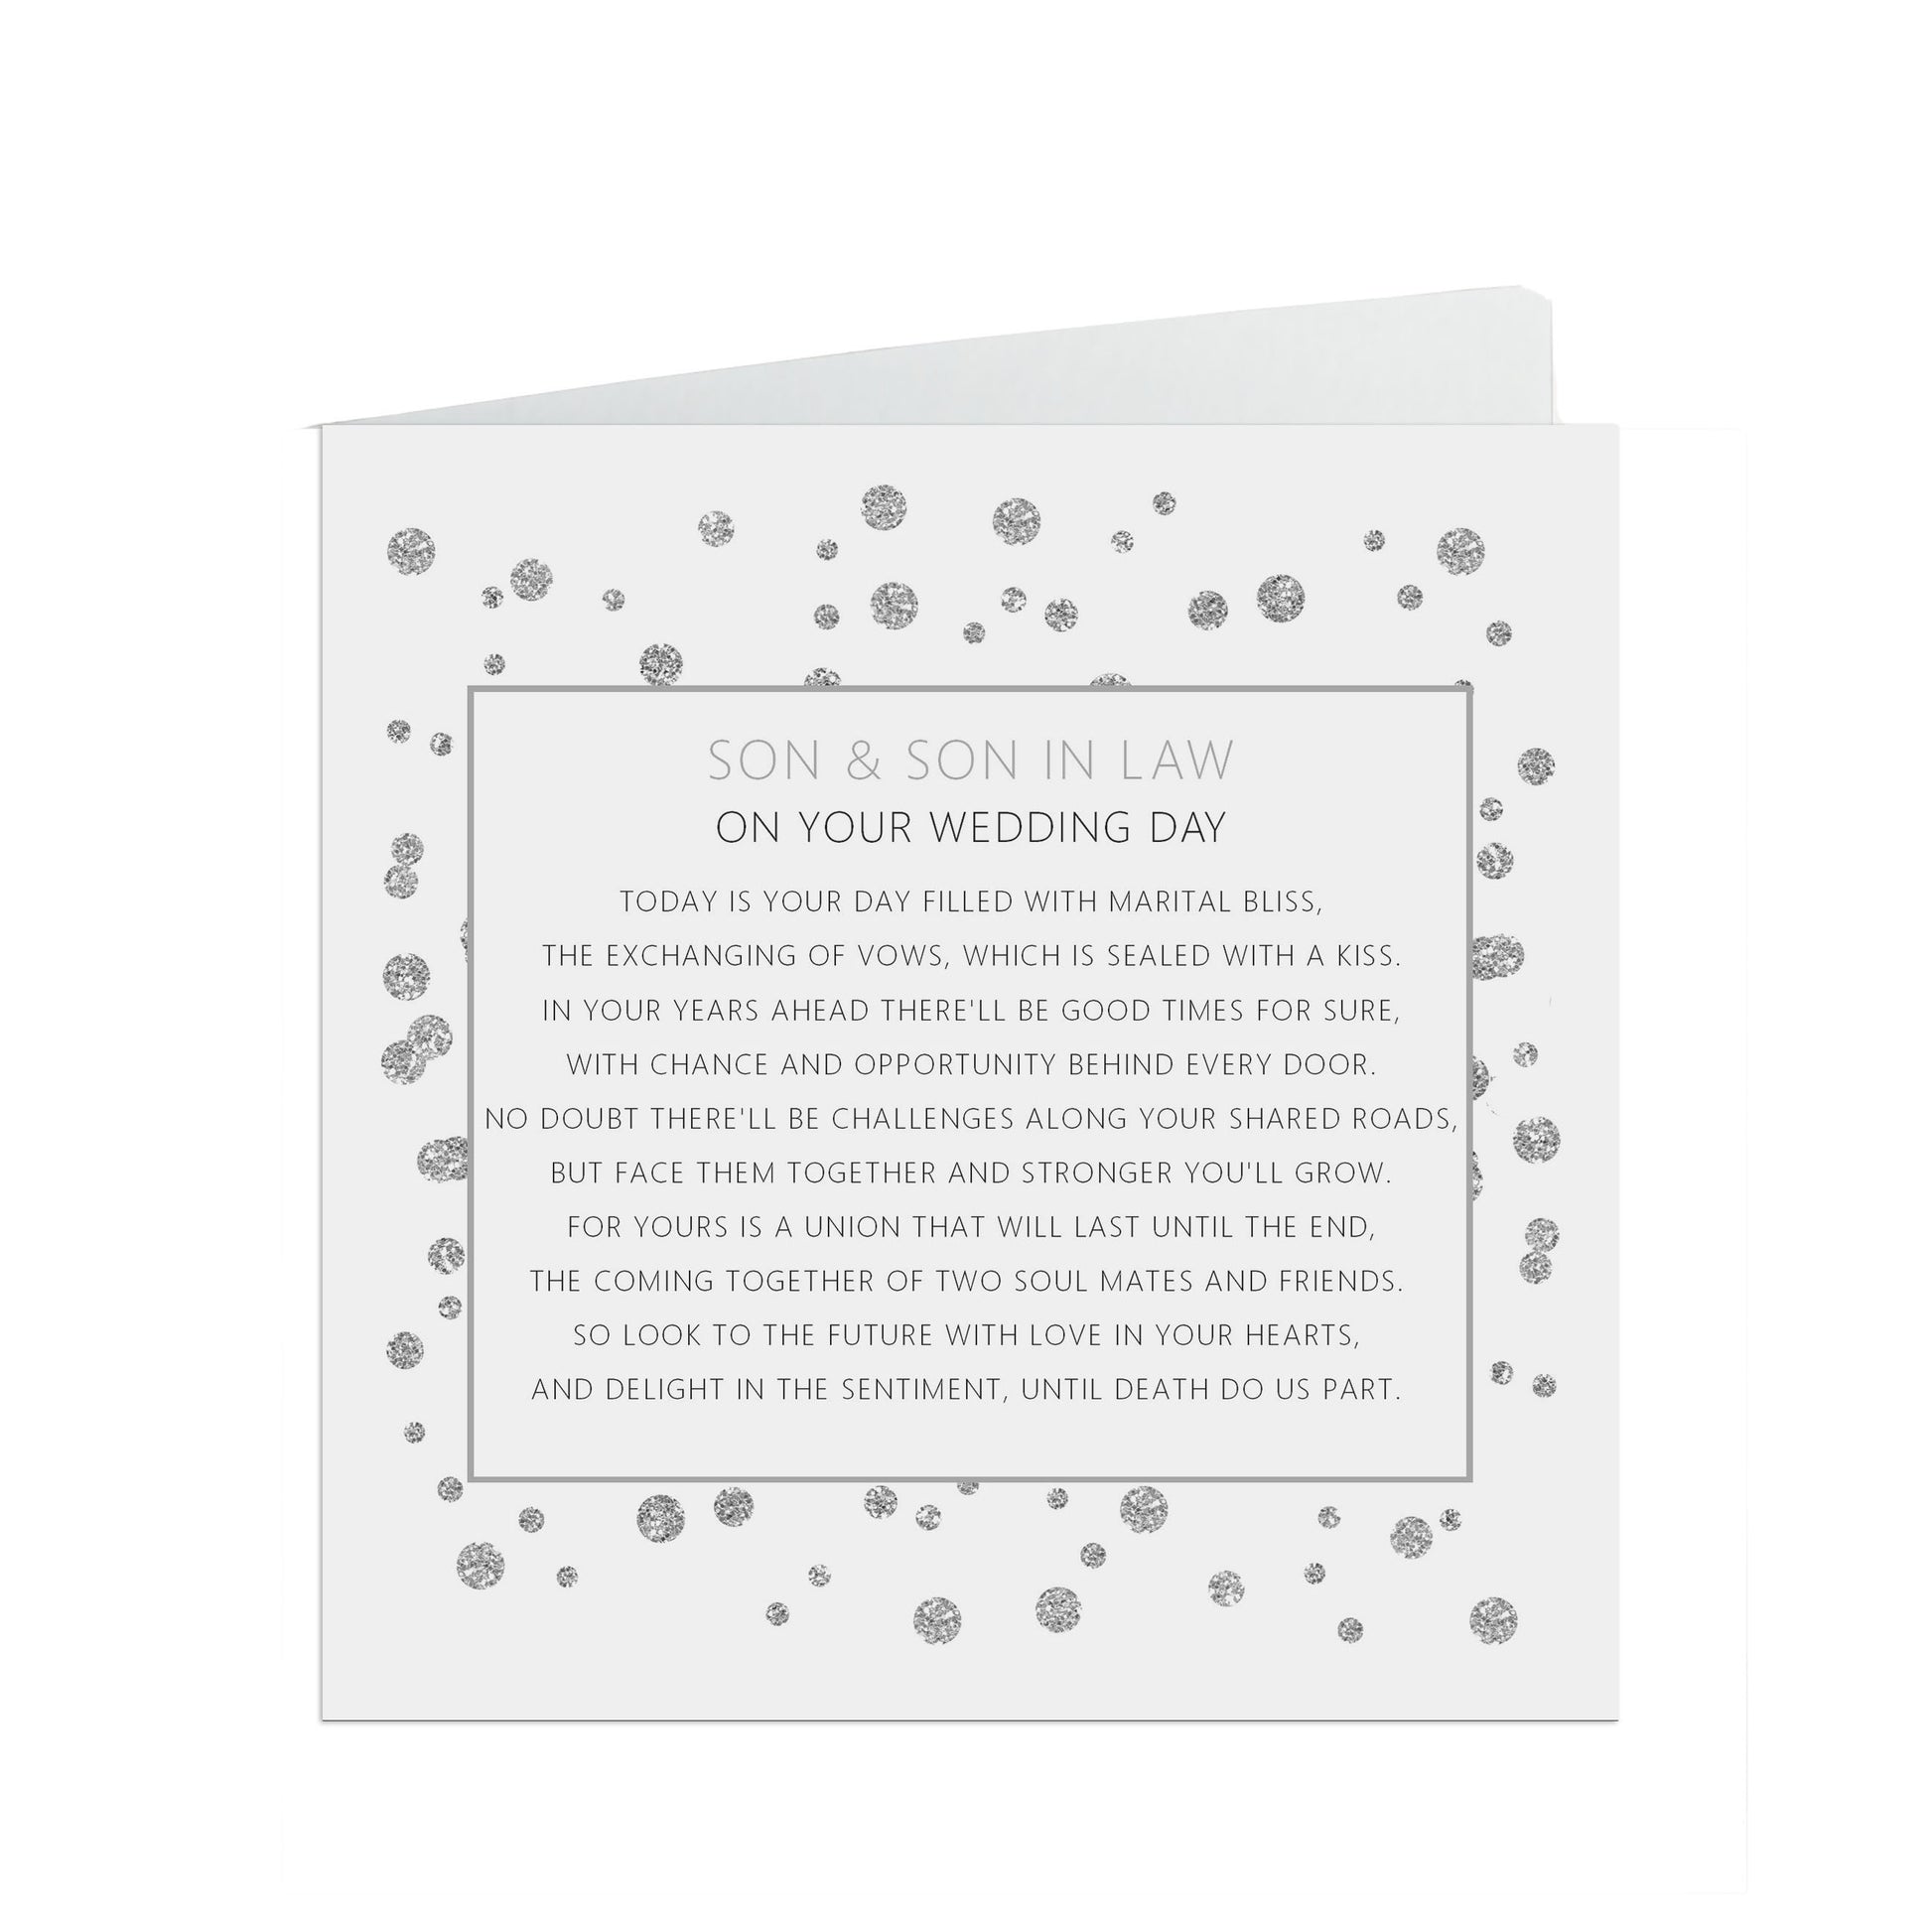 Son & Son In Law On Your Wedding Day Card, Silver Effect 6x6 Inches With A White Envelope